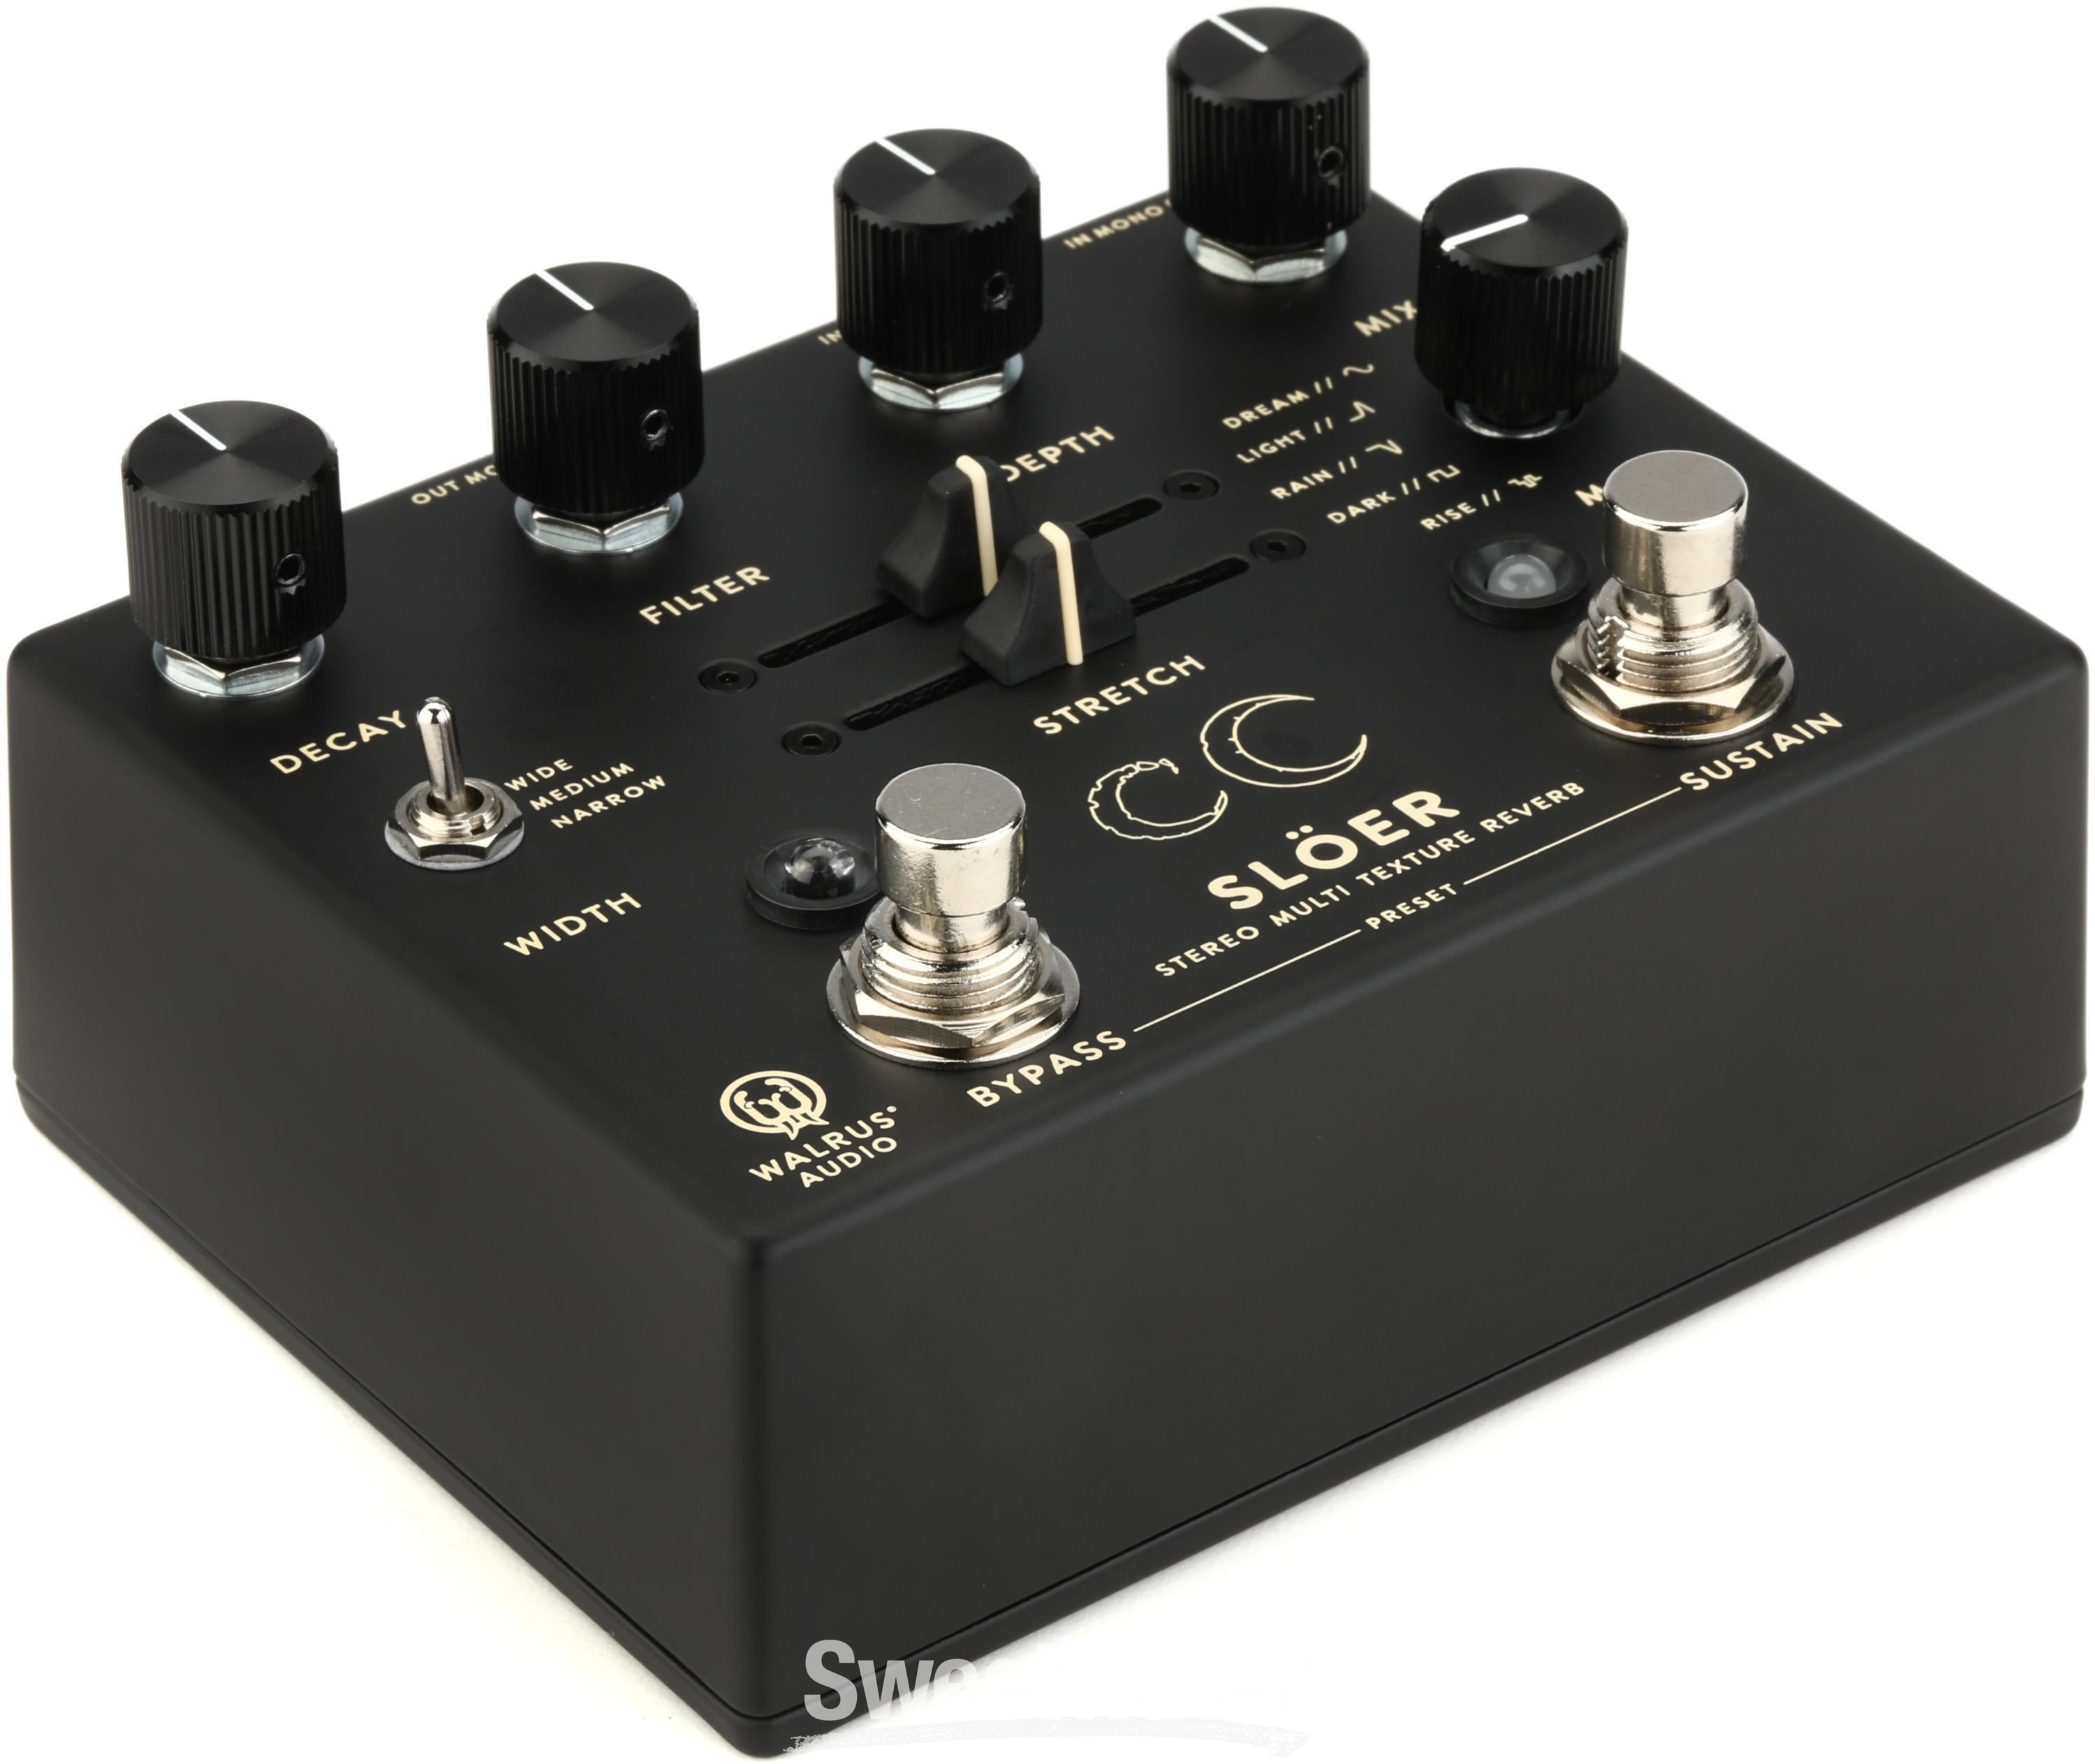 Walrus Audio Slöer Stereo Ambient Reverb Pedal - Black | Sweetwater